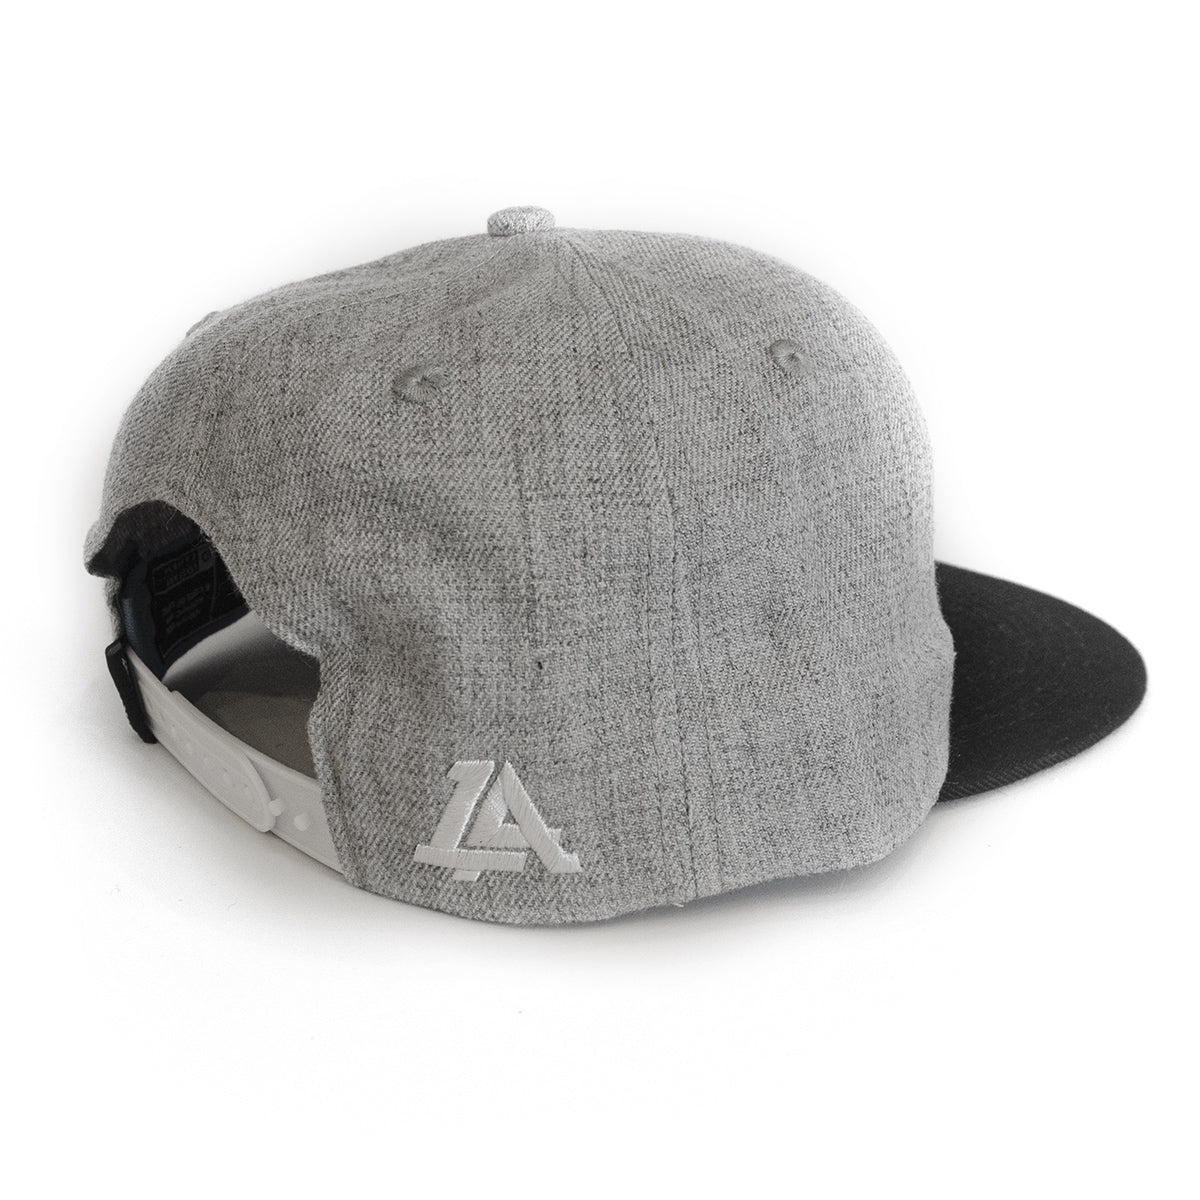 Lost Art Canada - white 807 grey wool mix snapback hat back view